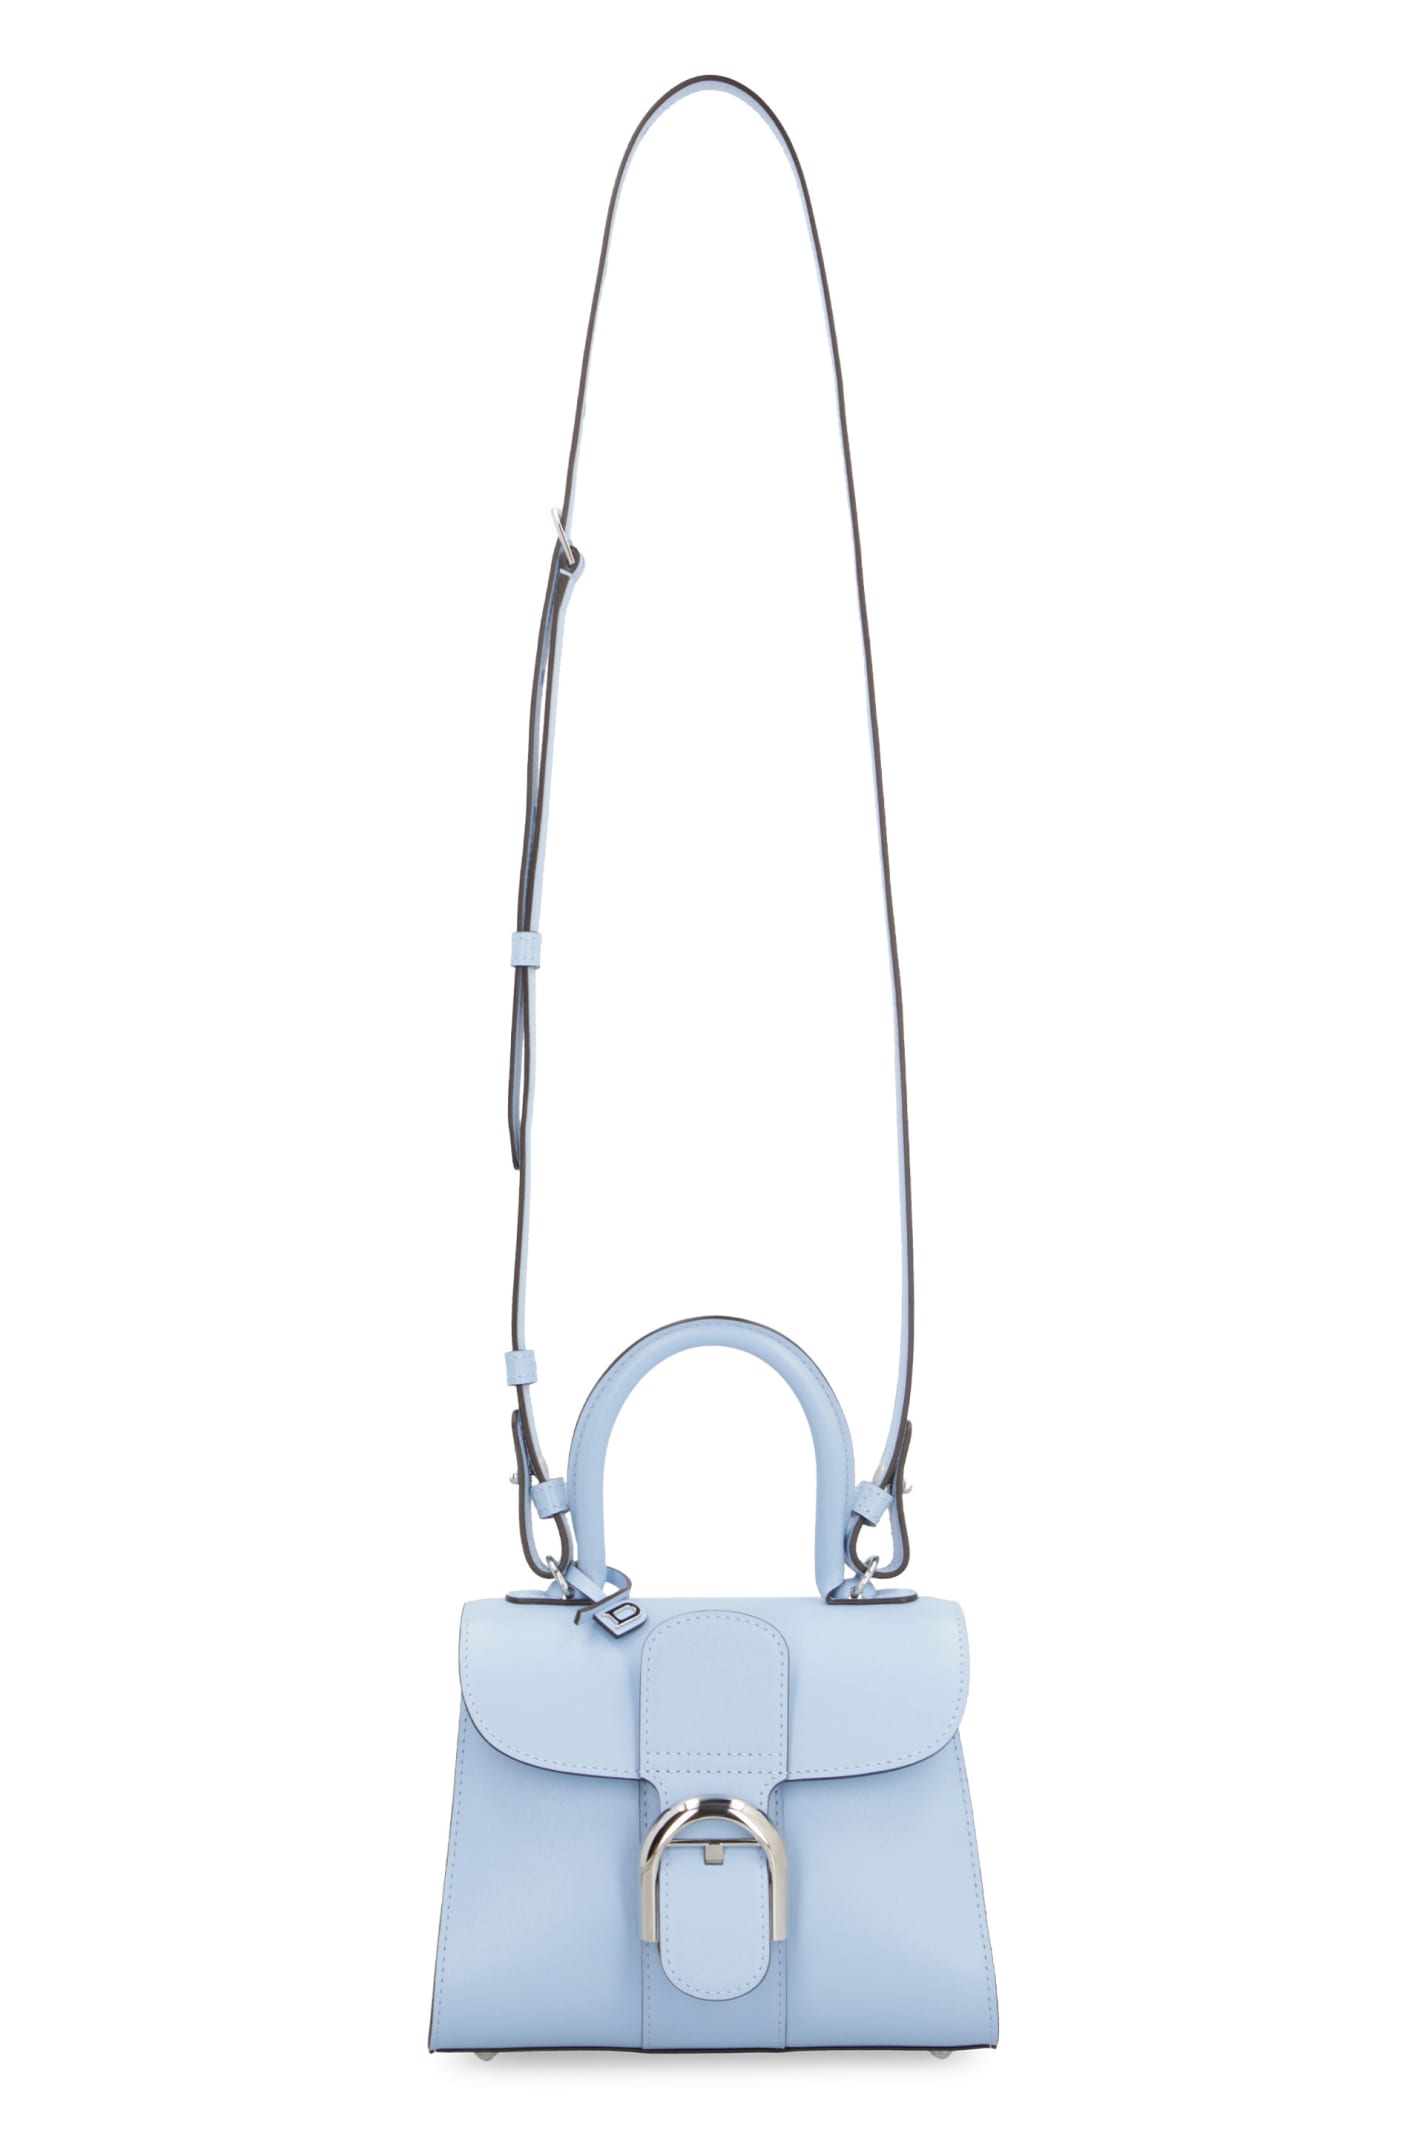 Delvaux Baby Blue Brillant MM at 1stDibs  delvaux brillant, delvaux mini  brillant, delvaux brillant blue